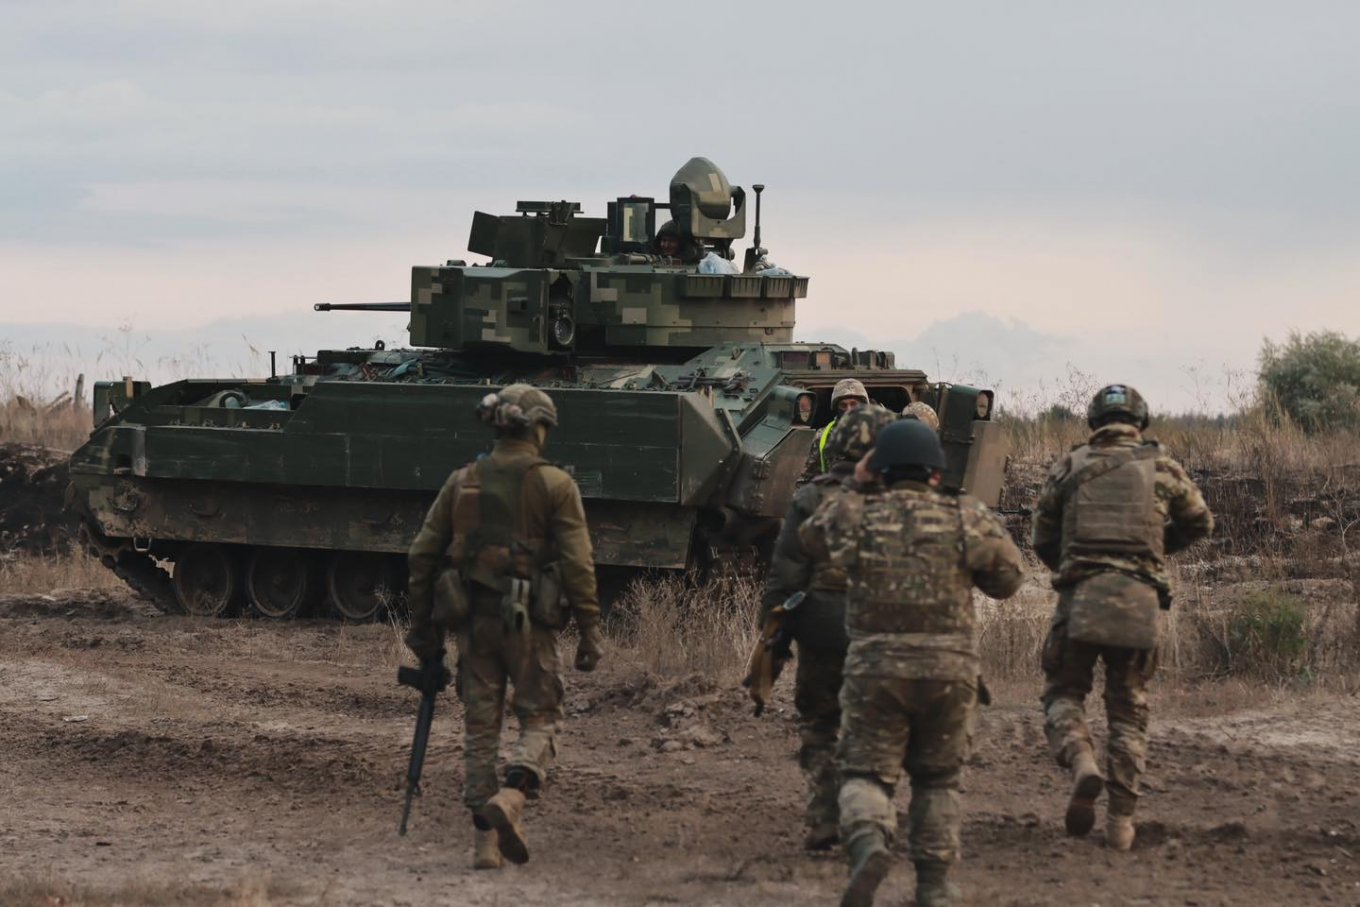 M2 Bradley in service with the Armed Forces of Ukraine